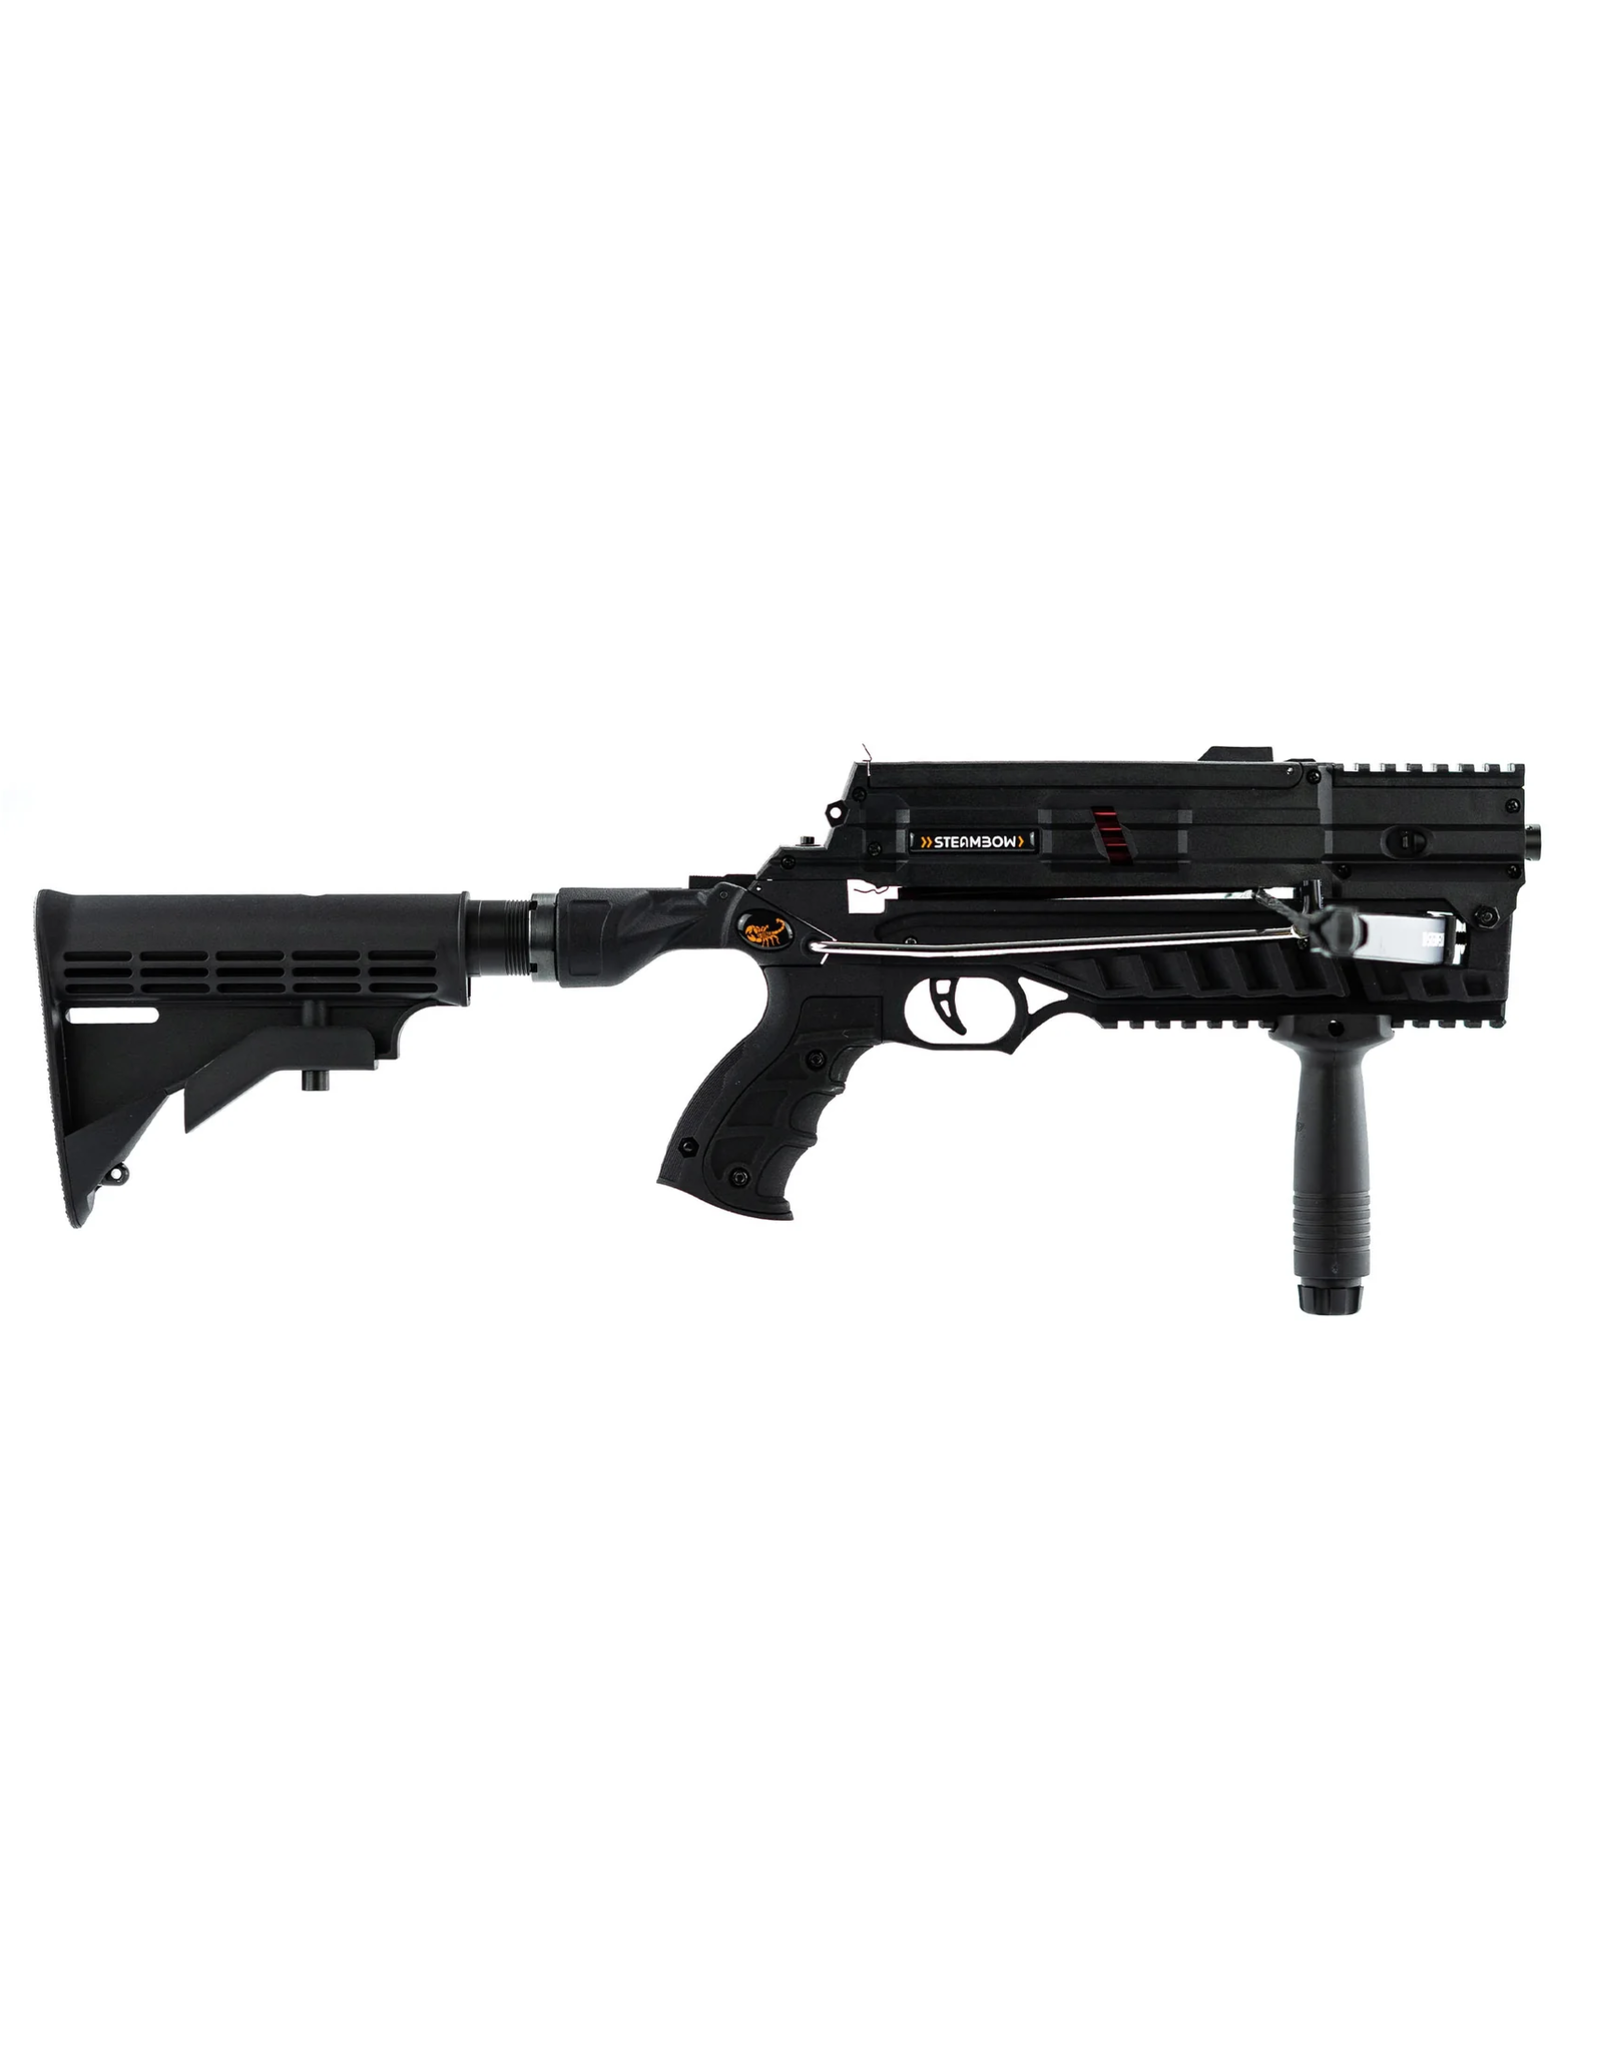 Steambow AR-6 Stinger II Tactical